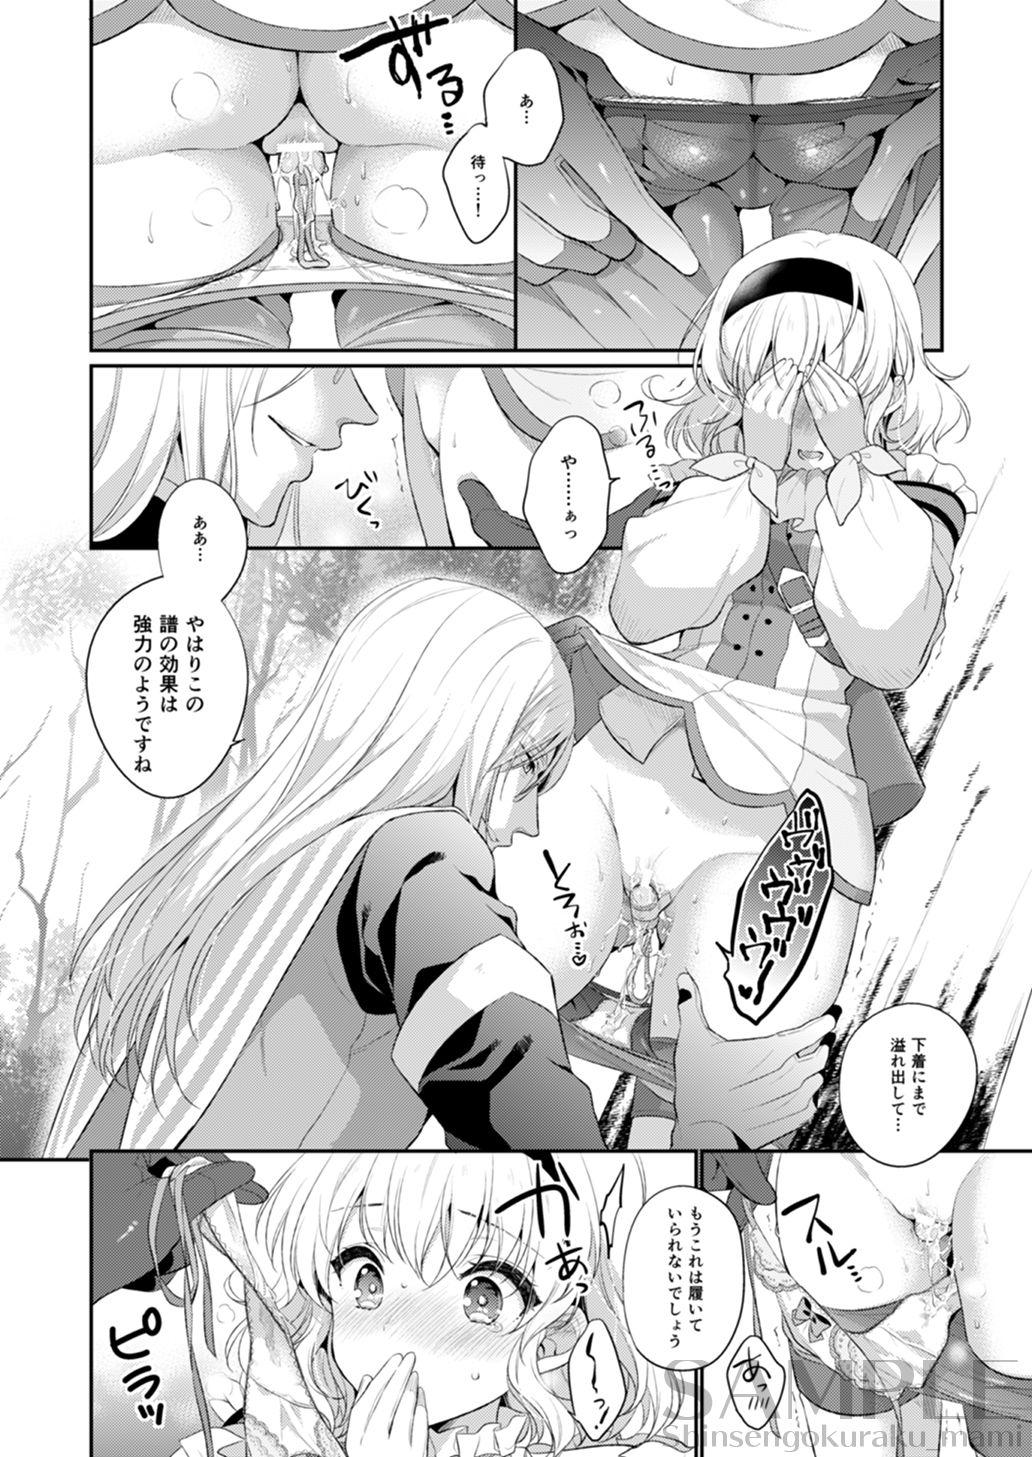 Bdsm dolcemente - Tales of the abyss Class Room - Page 11